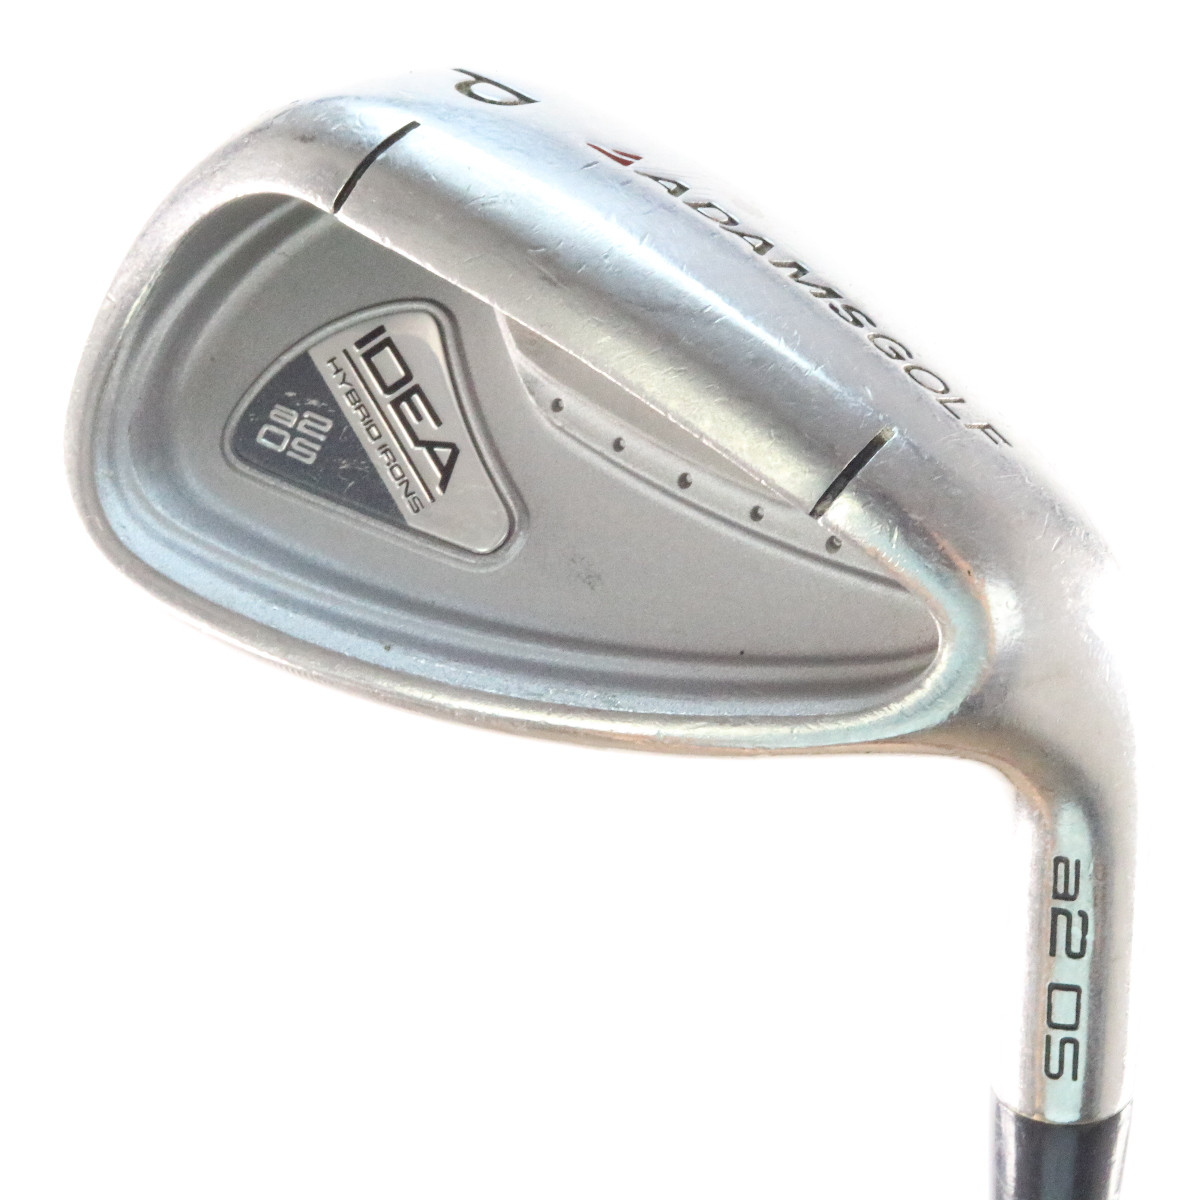 loft of pitching wedge